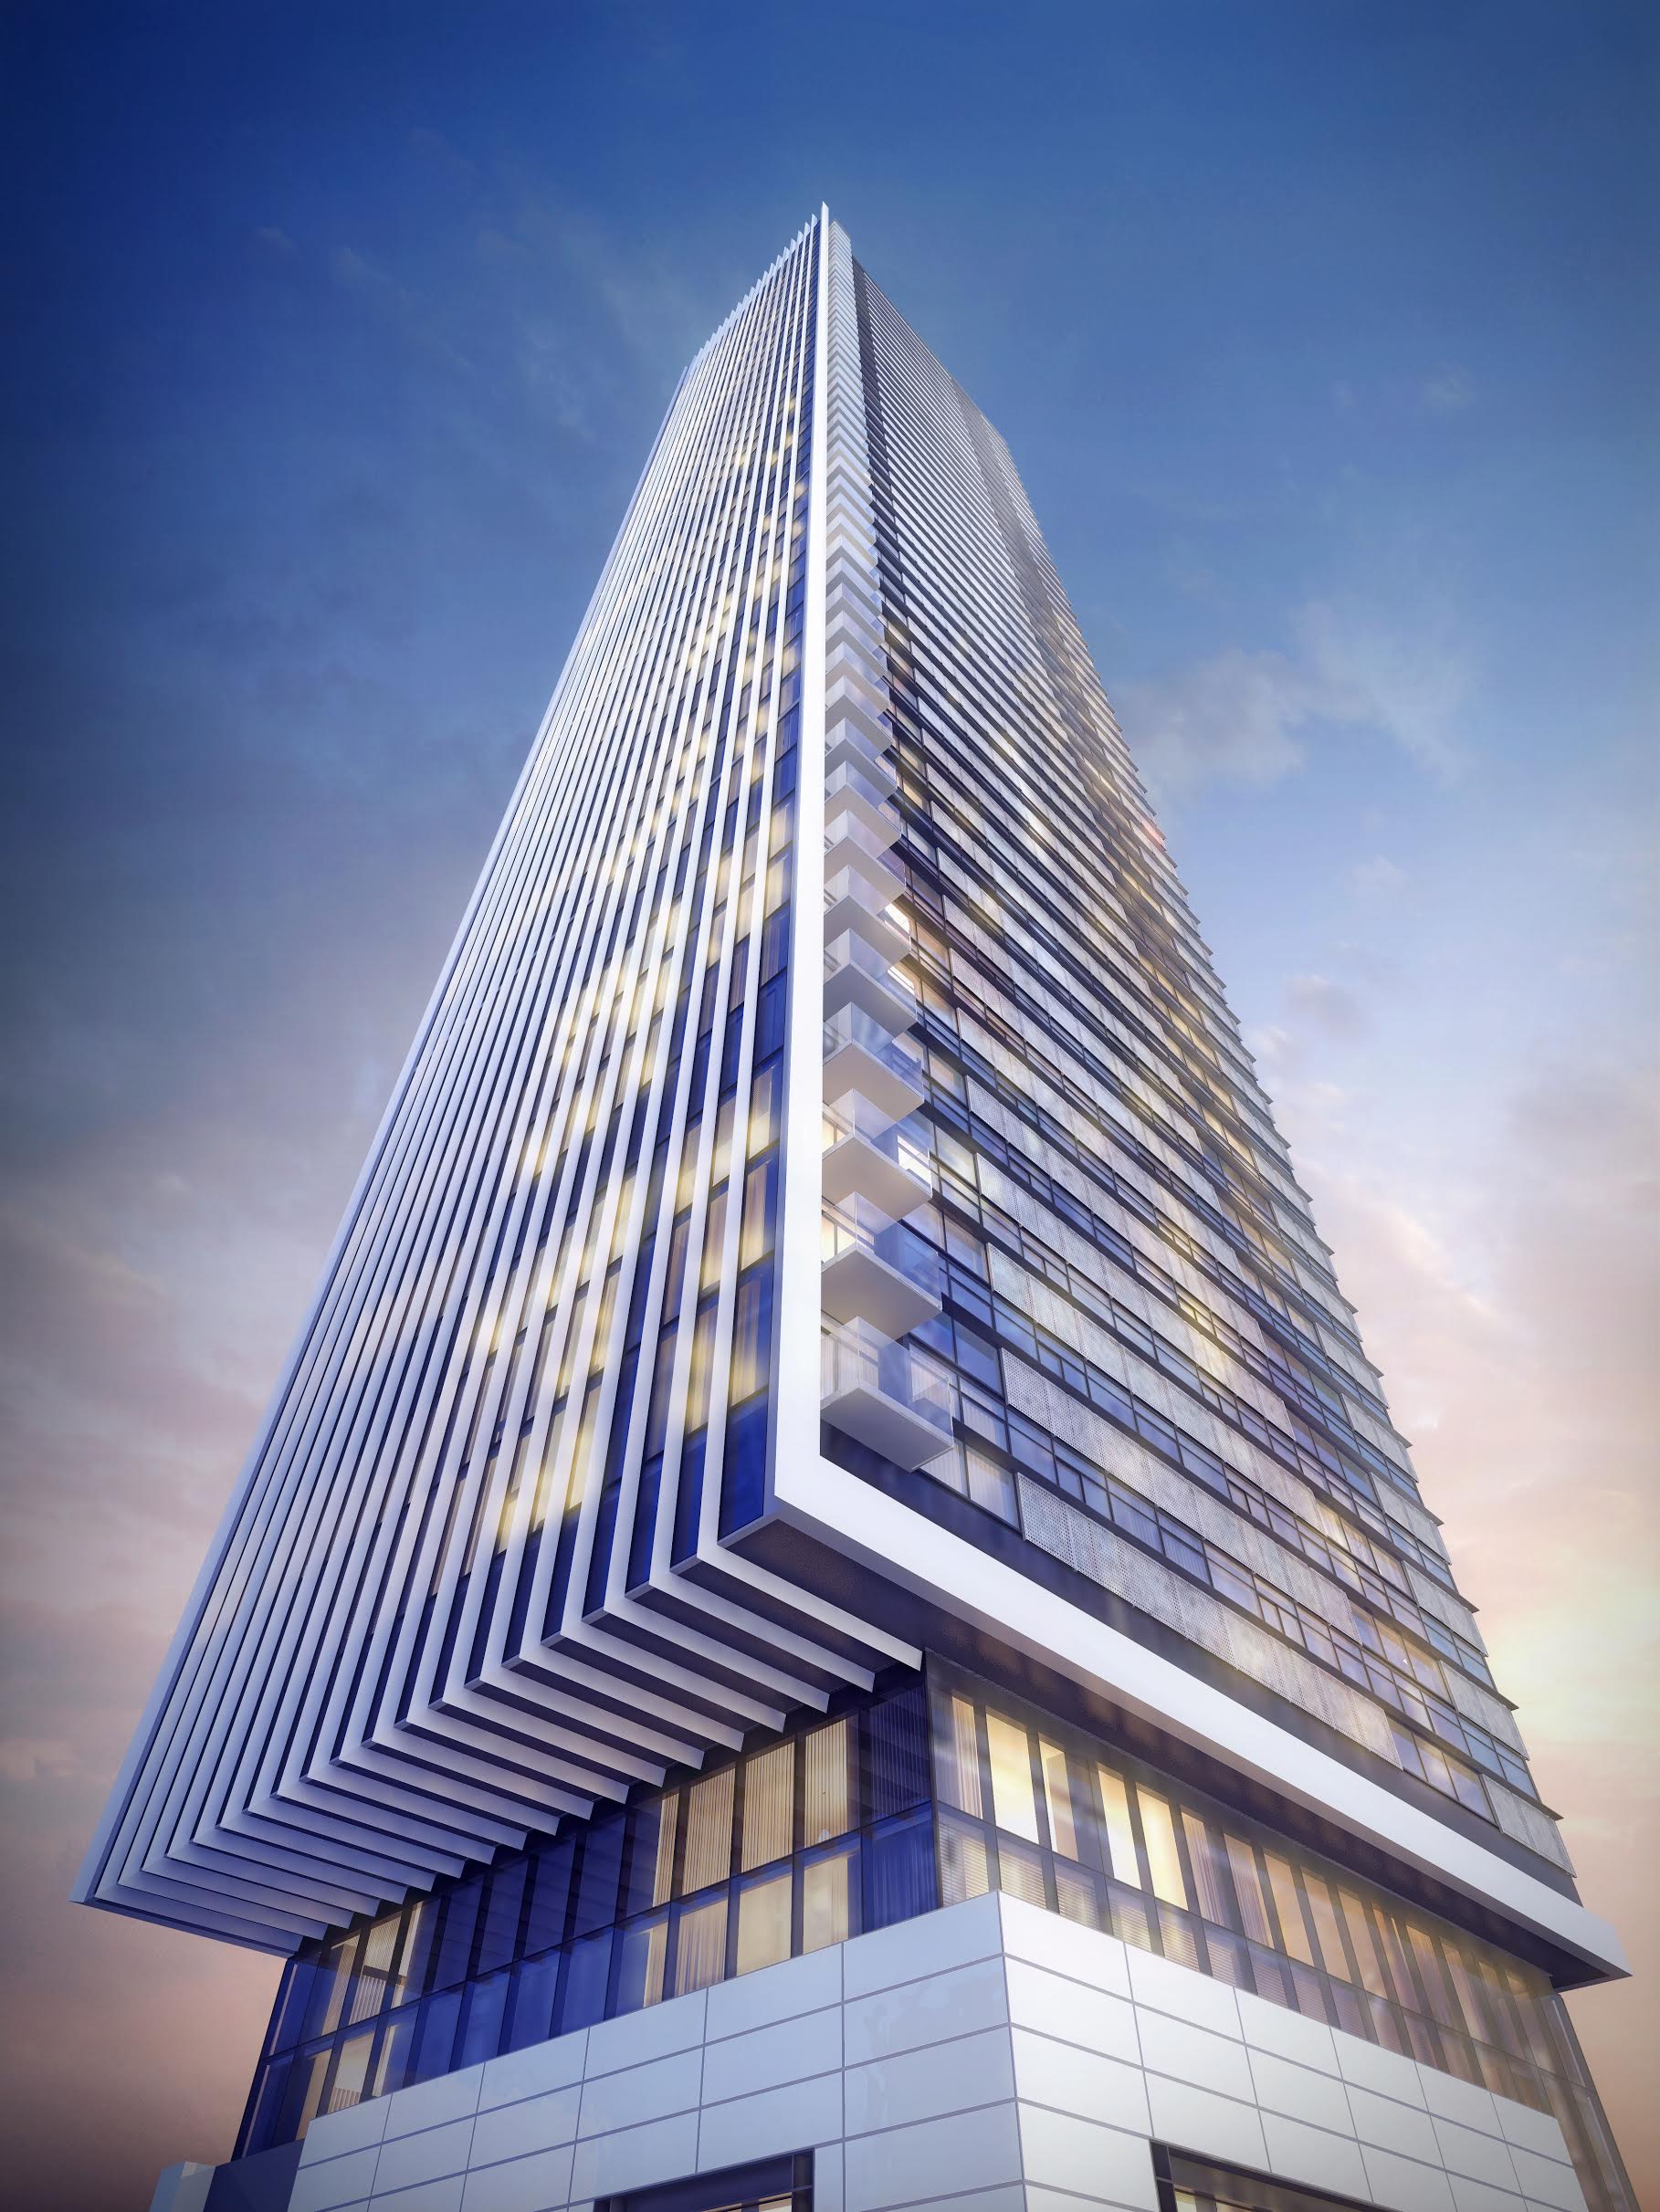 Rendering of 8 Cumberland Condos exterior worms-eye view.